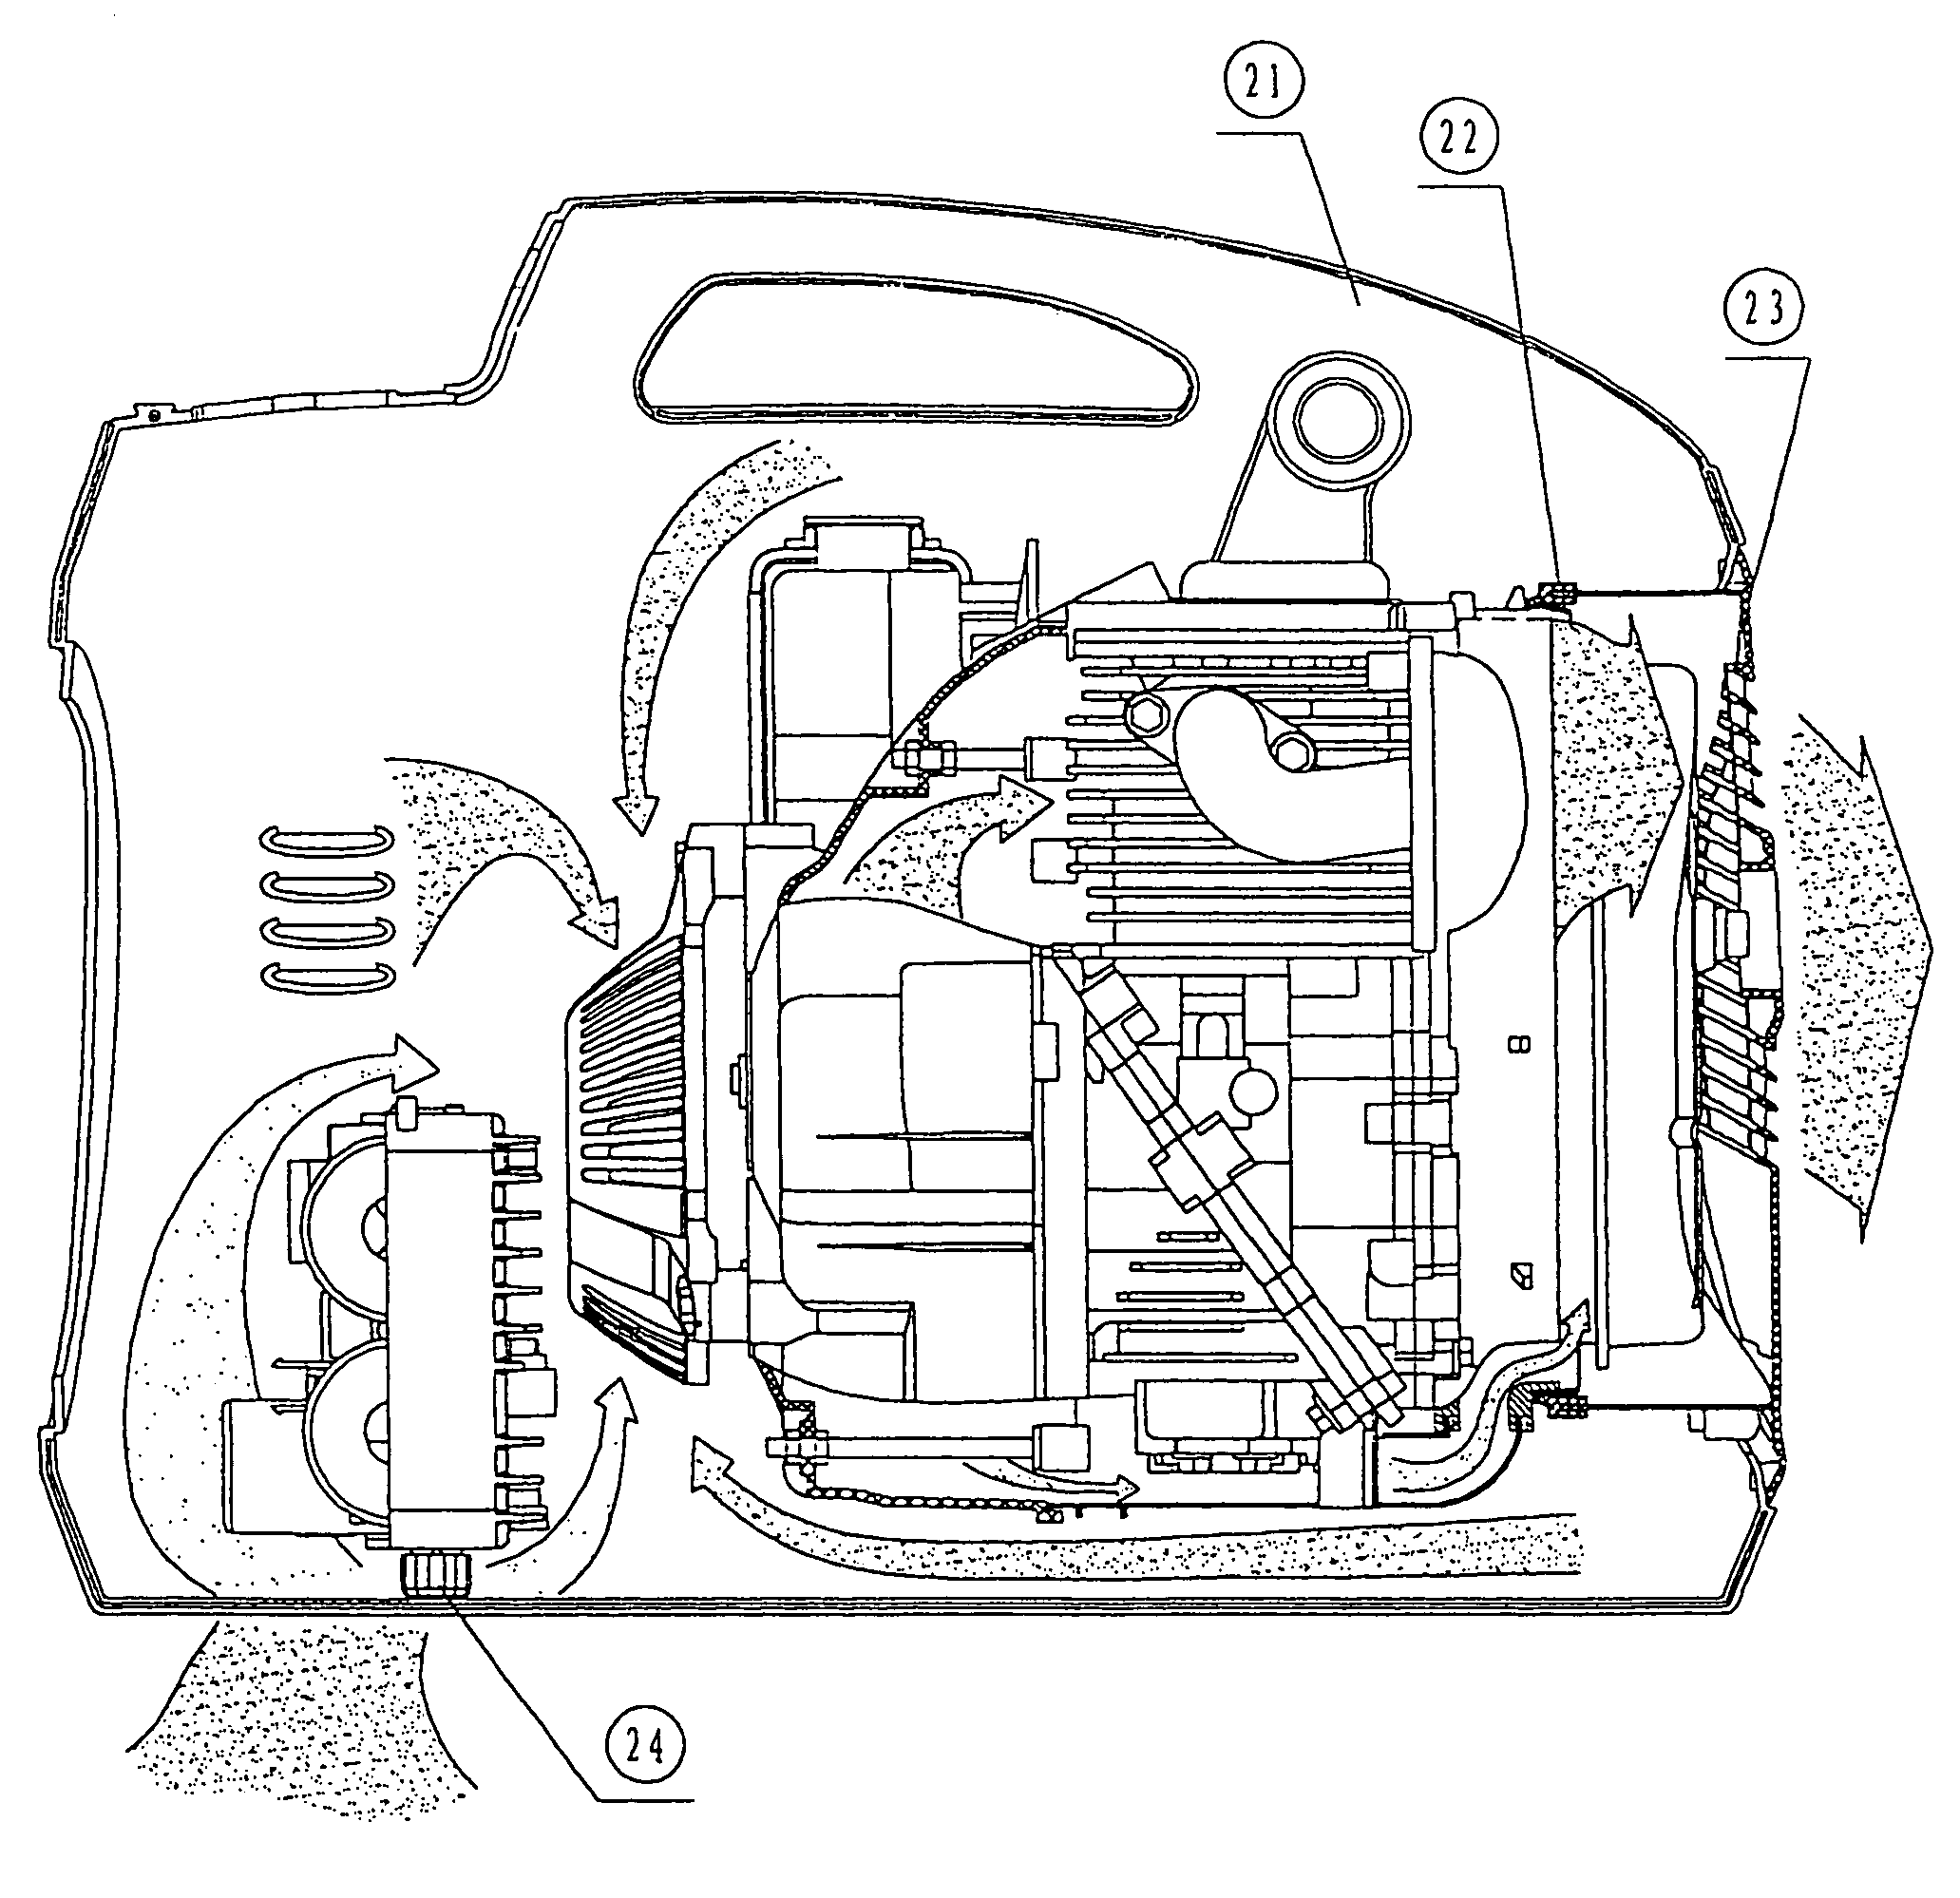 Cooling system of an engine for the inside of a generator